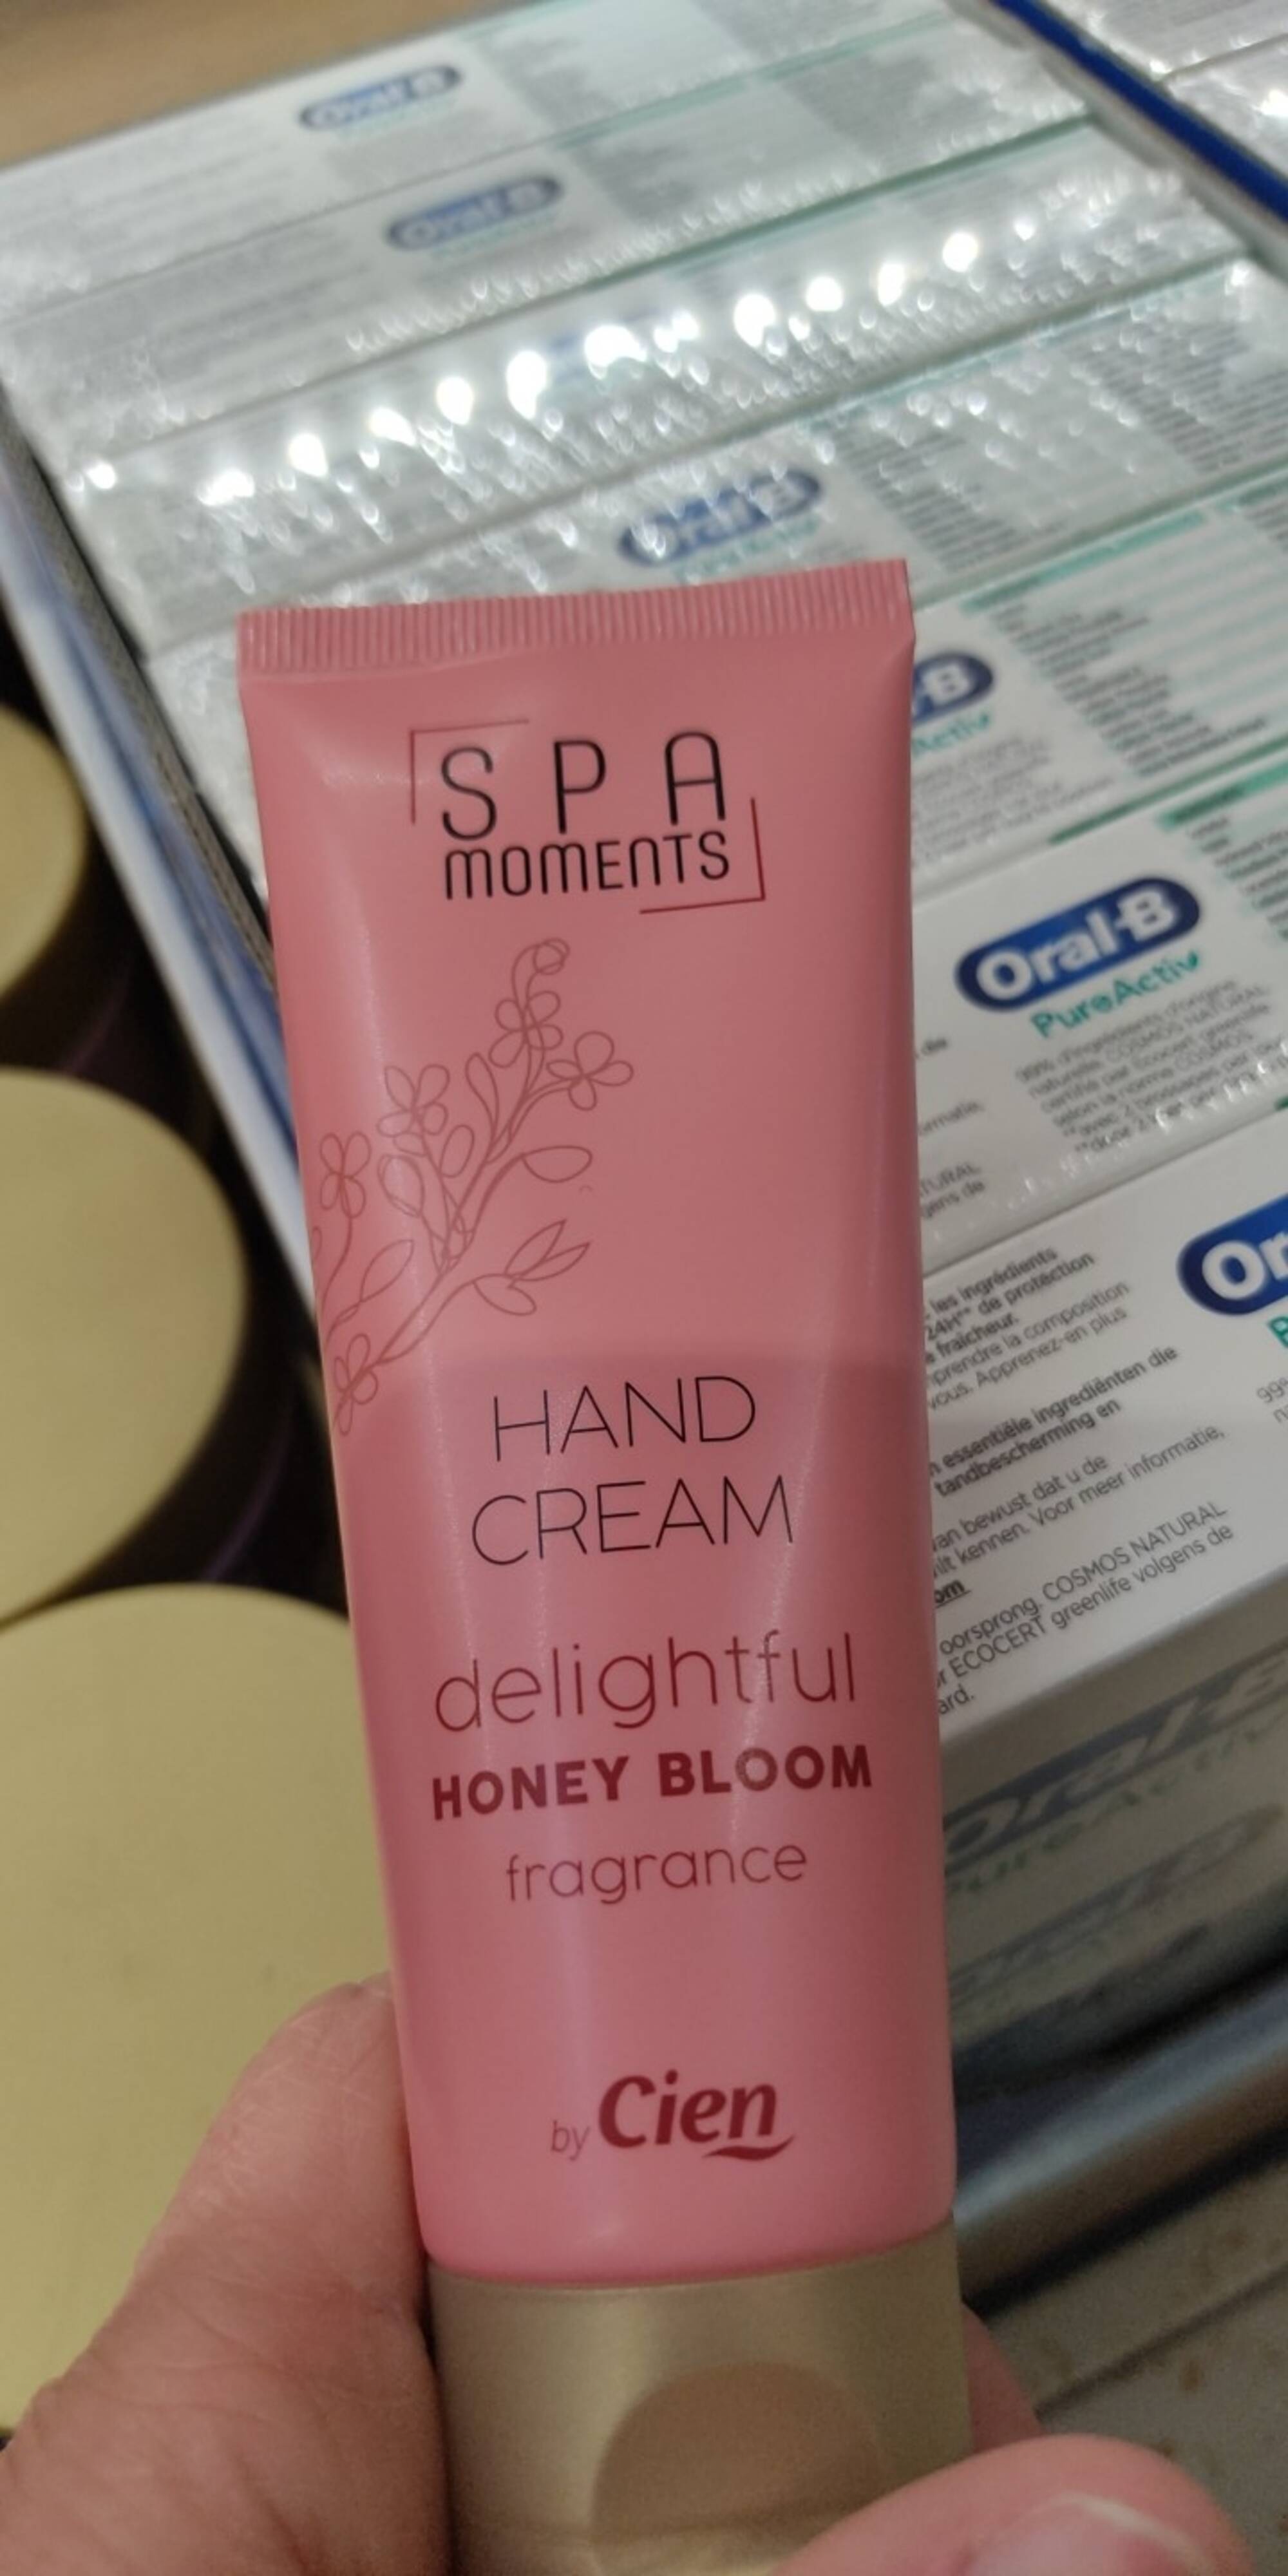 LIDL - SPA moment by Cien - Hand cream